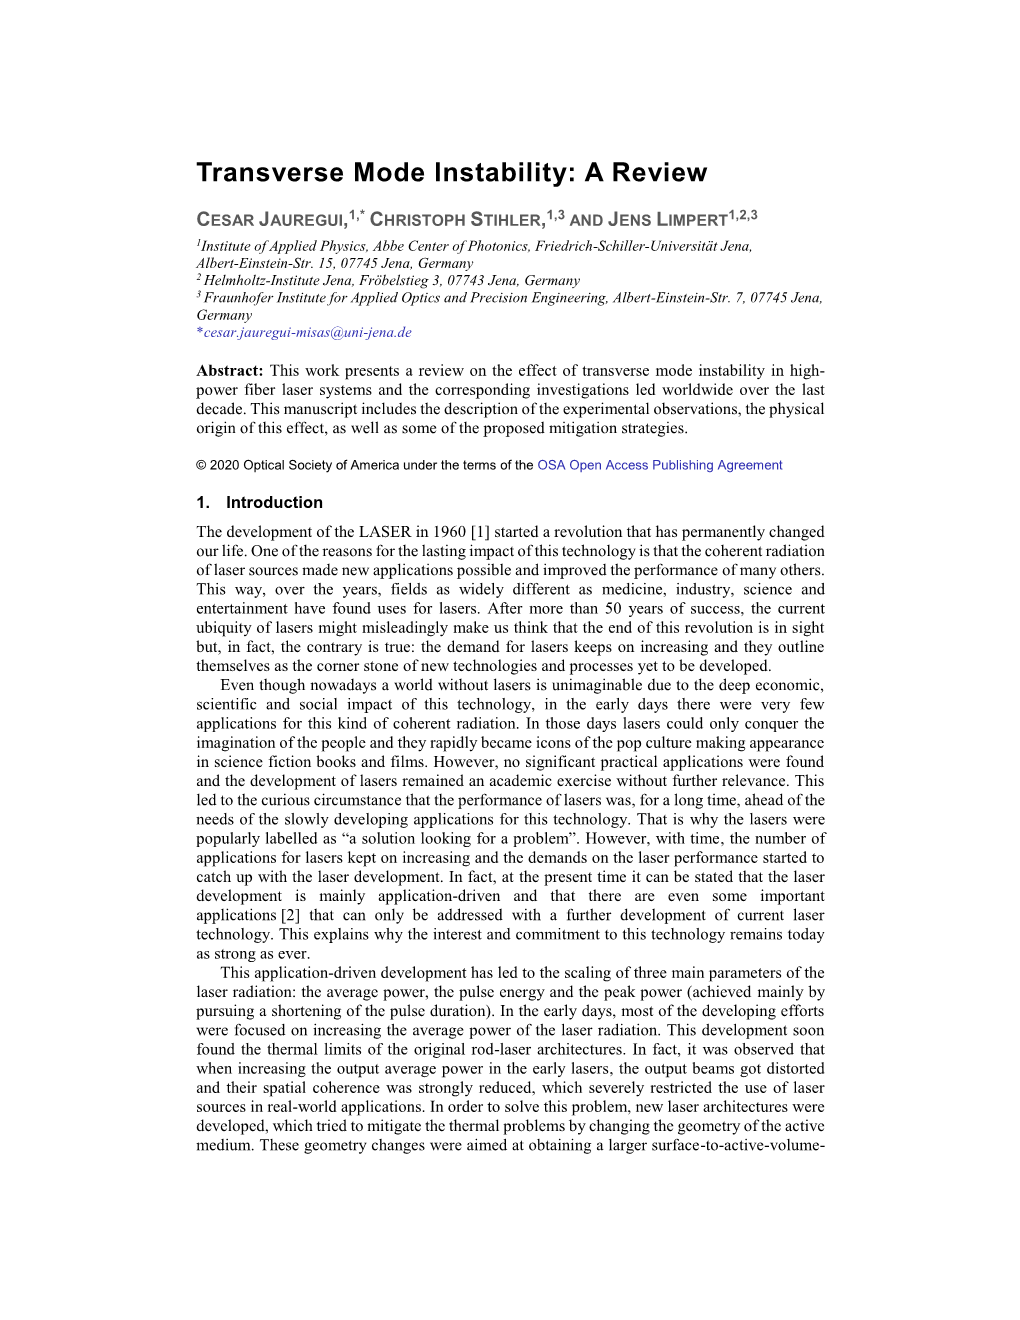 Transverse Mode Instability: a Review